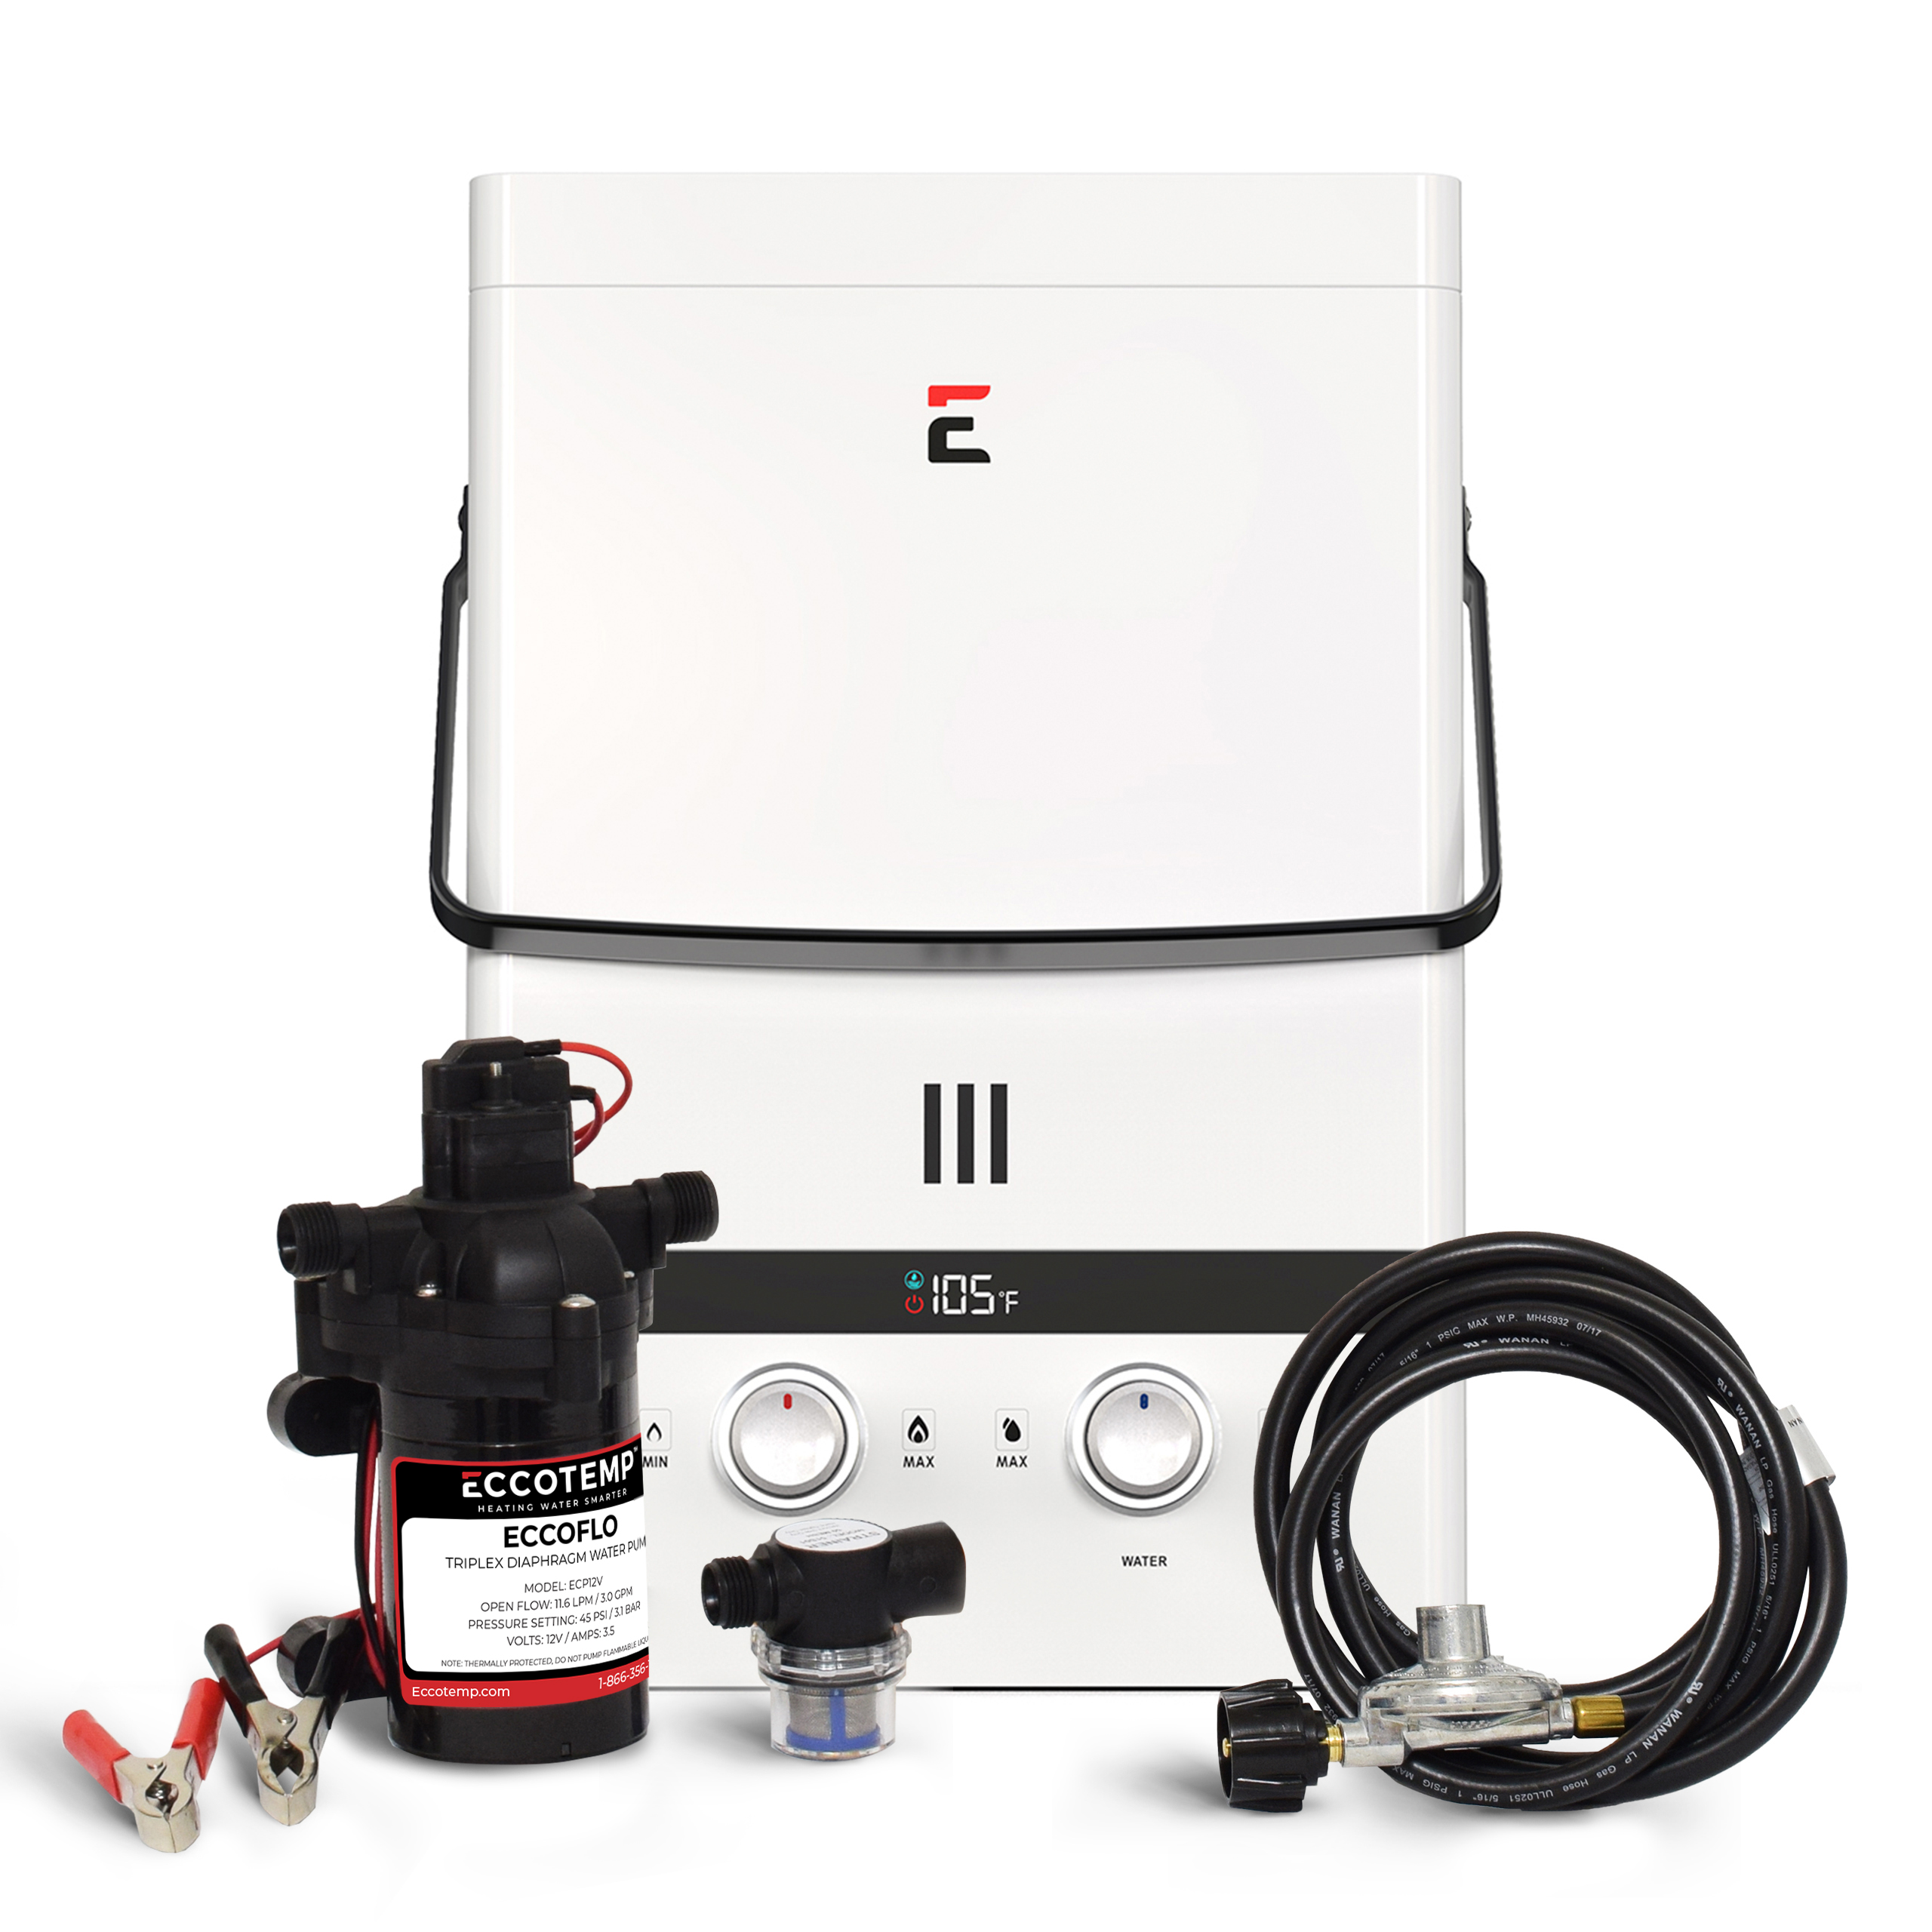 Eccotemp Luxe 1.85 GPM Outdoor Portable Tankless Water Heater w/ EccoFlo Diaphragm 12V Pump and Strainer